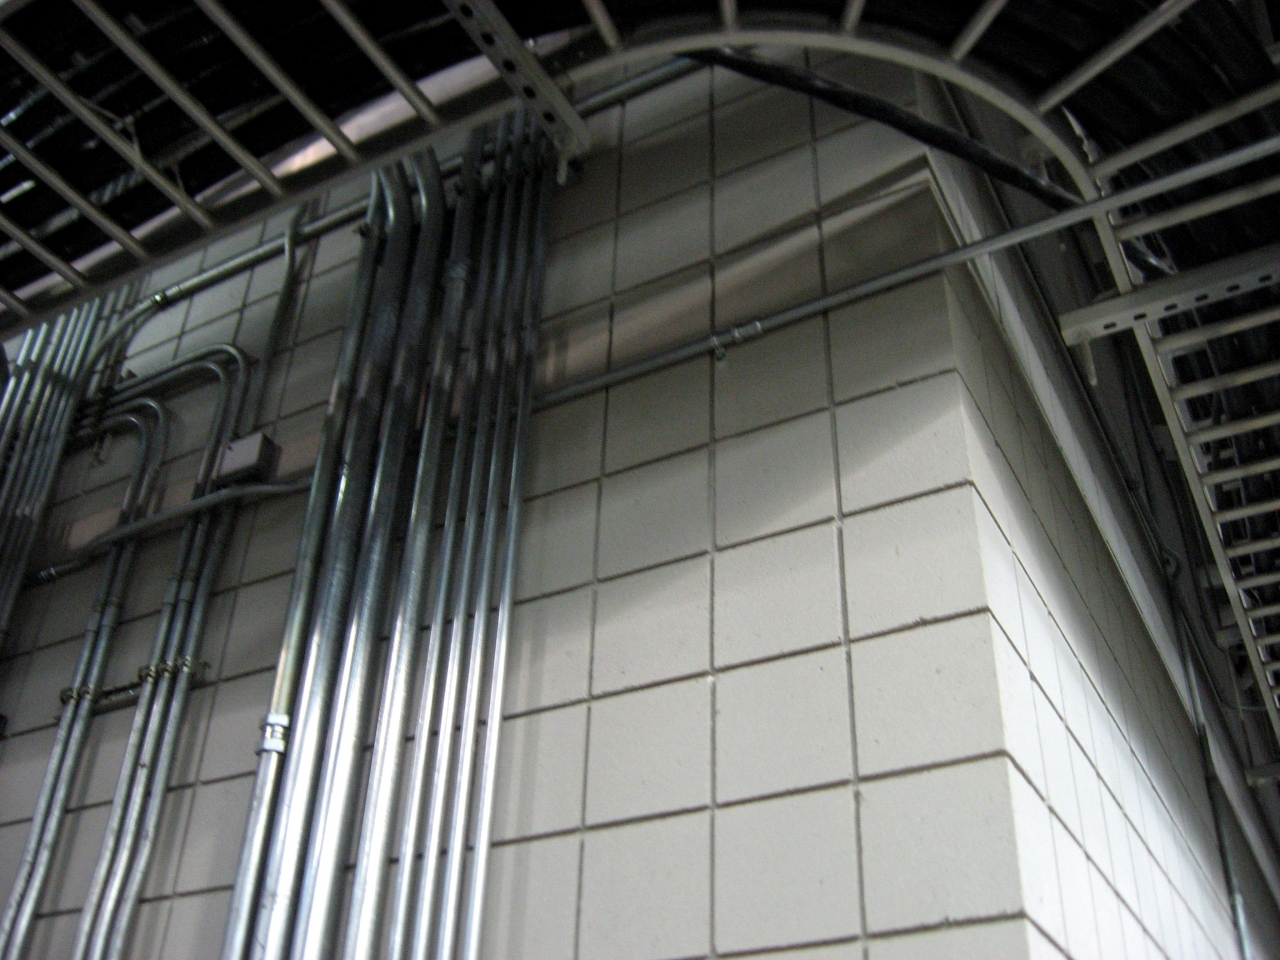 Pipes and cables overhead the DC Field wing corridor.